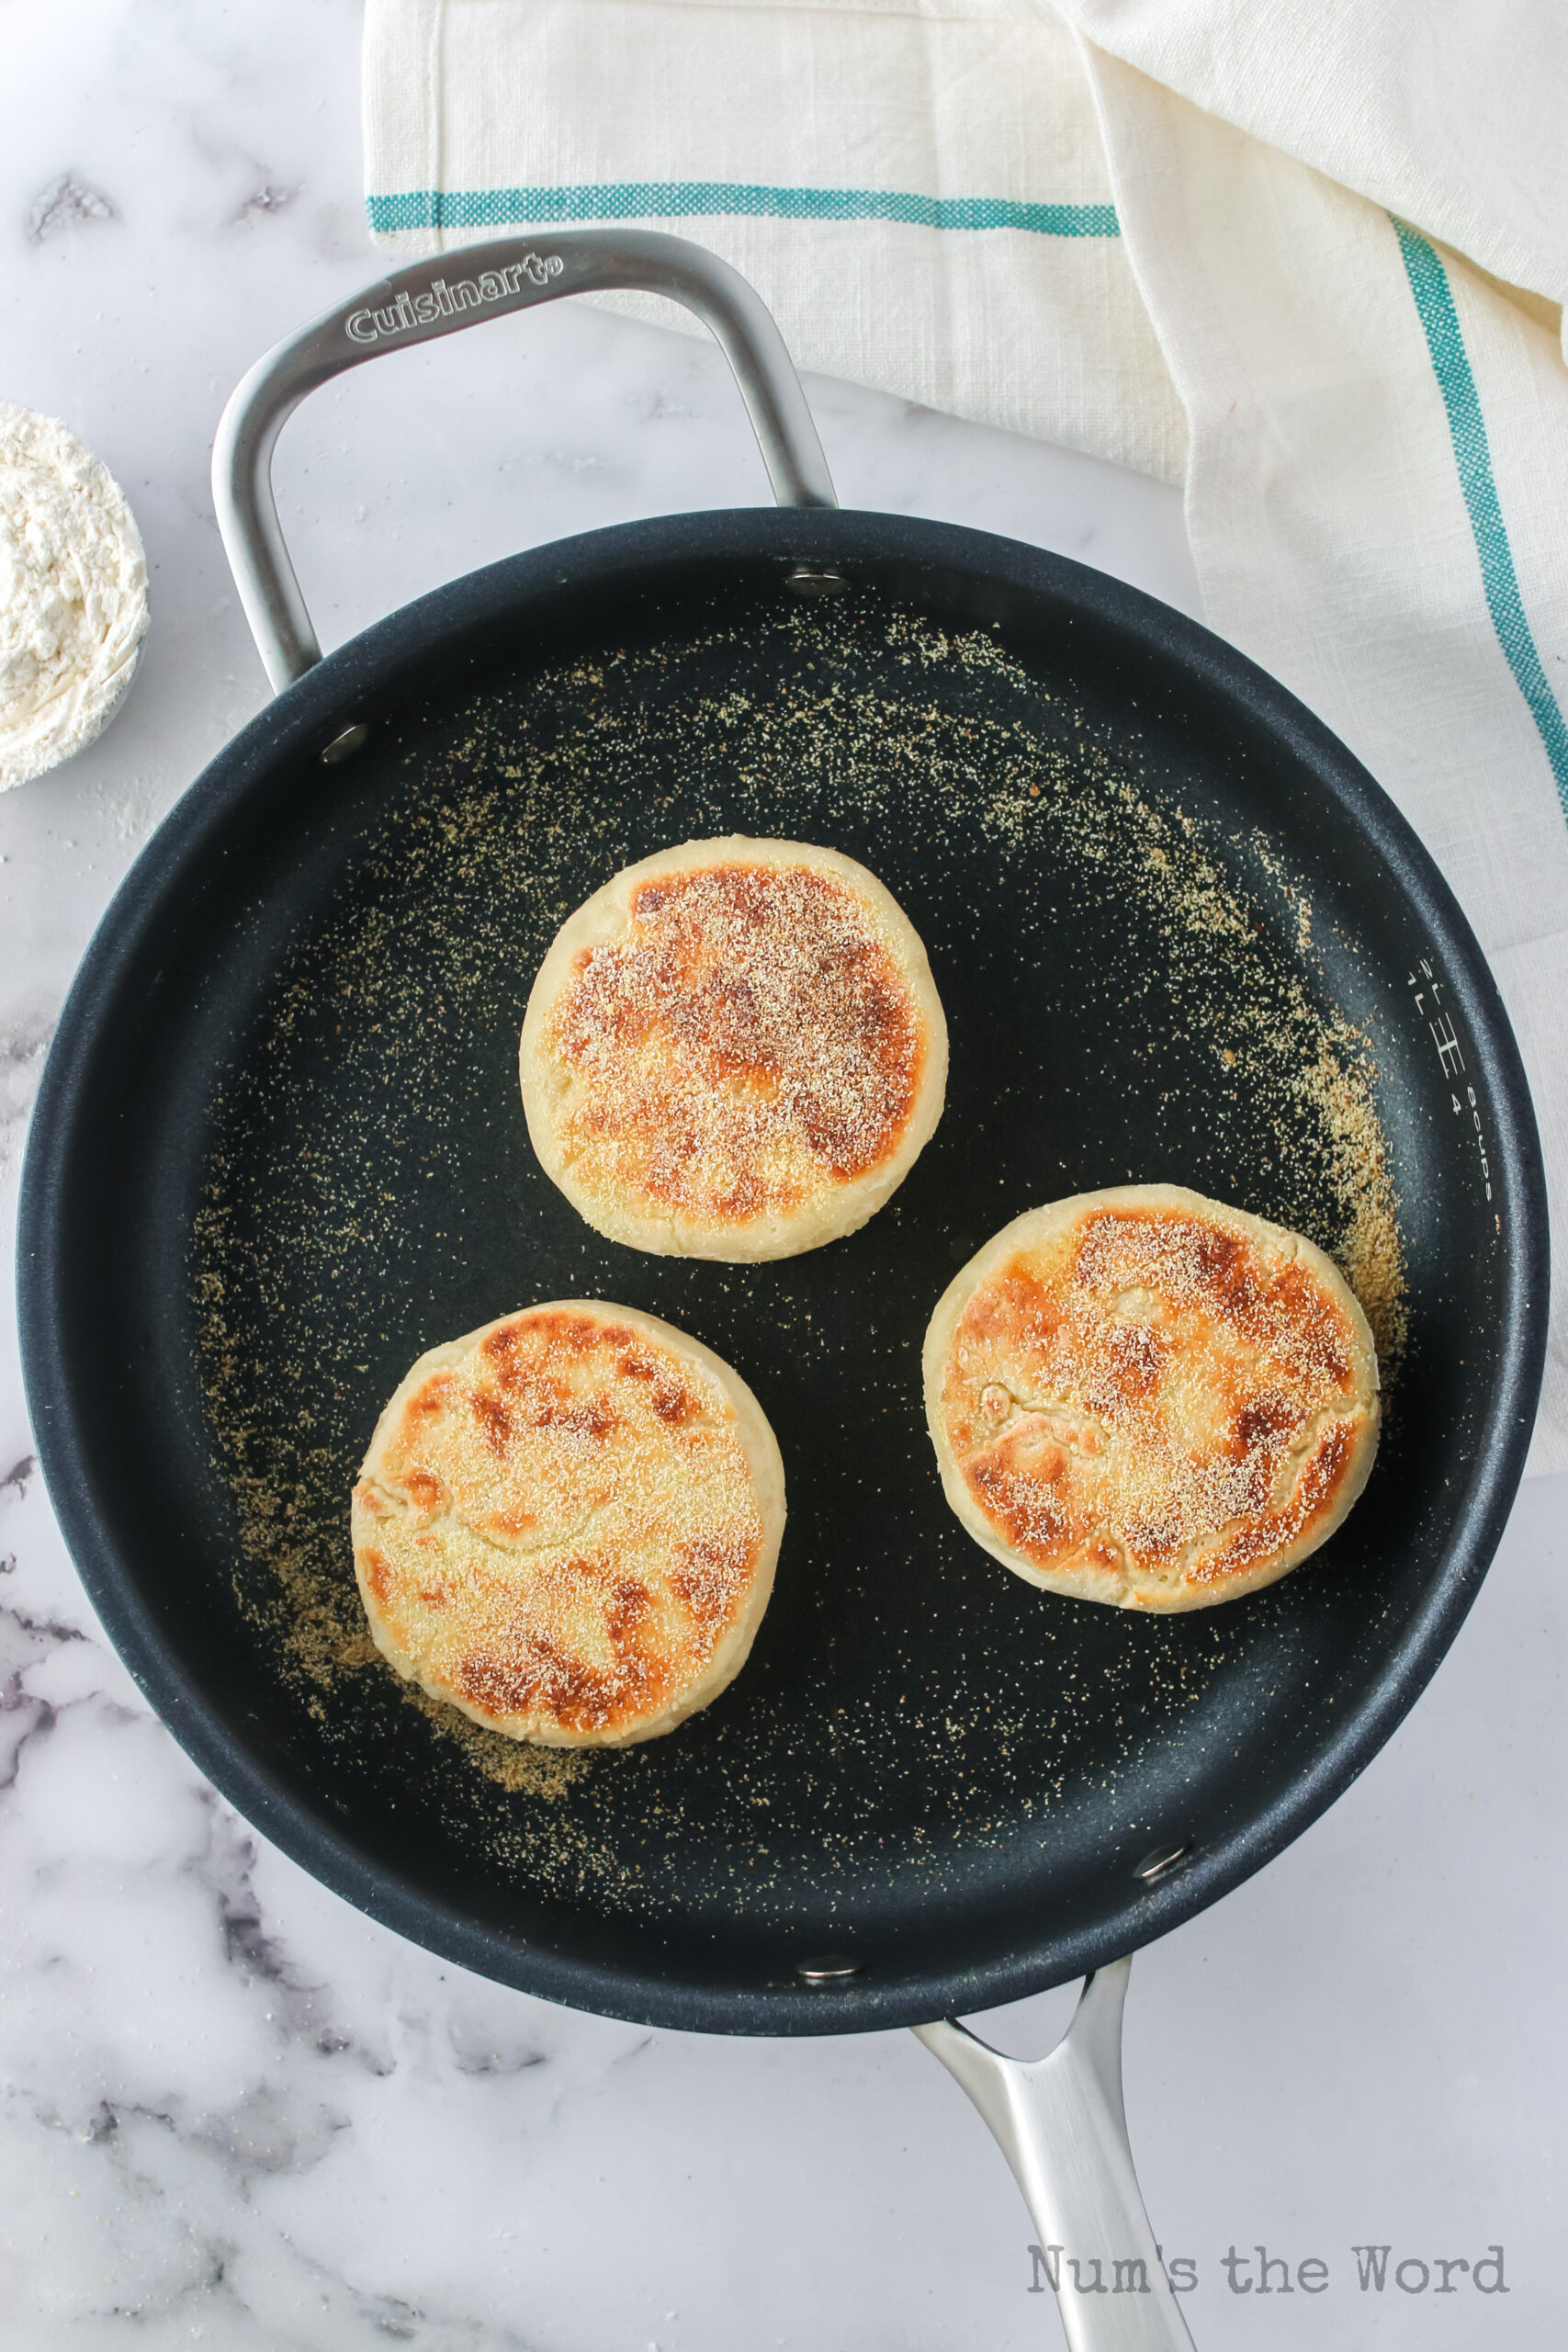 english muffins flipped over in skillet to show cooked side.